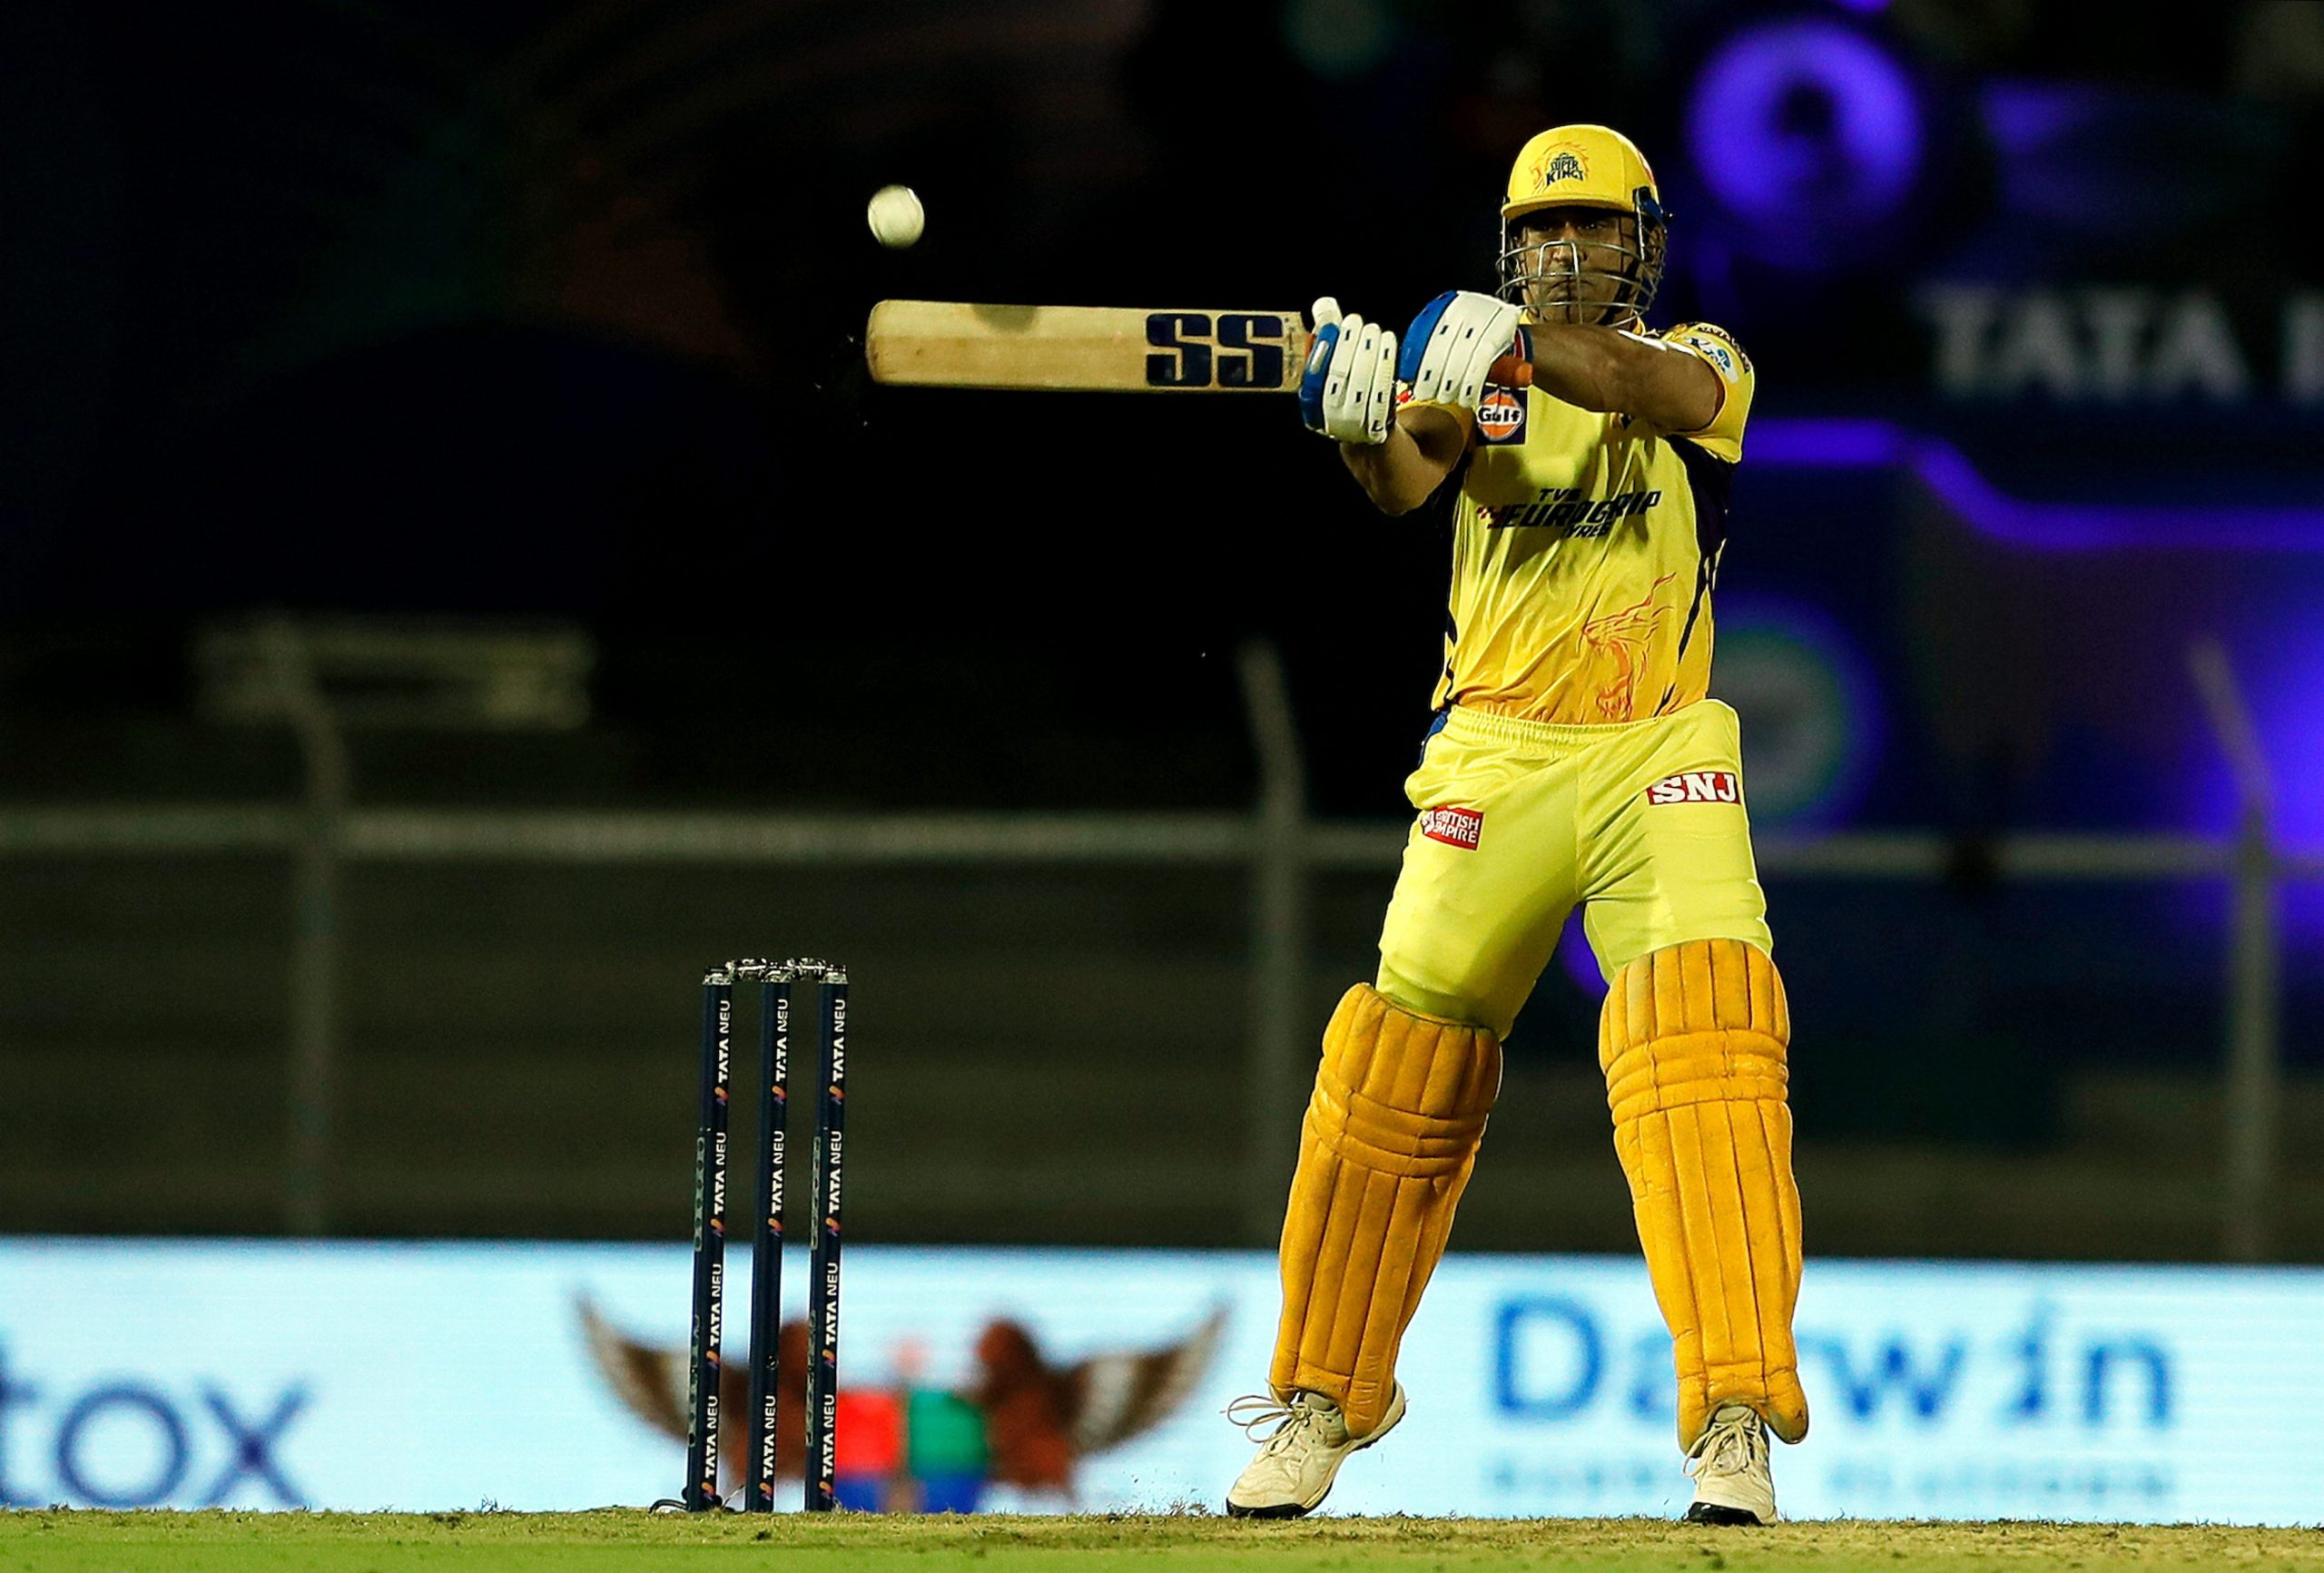 MS Dhoni back as captain is going to be good for CSK: Sunil Gavaskar